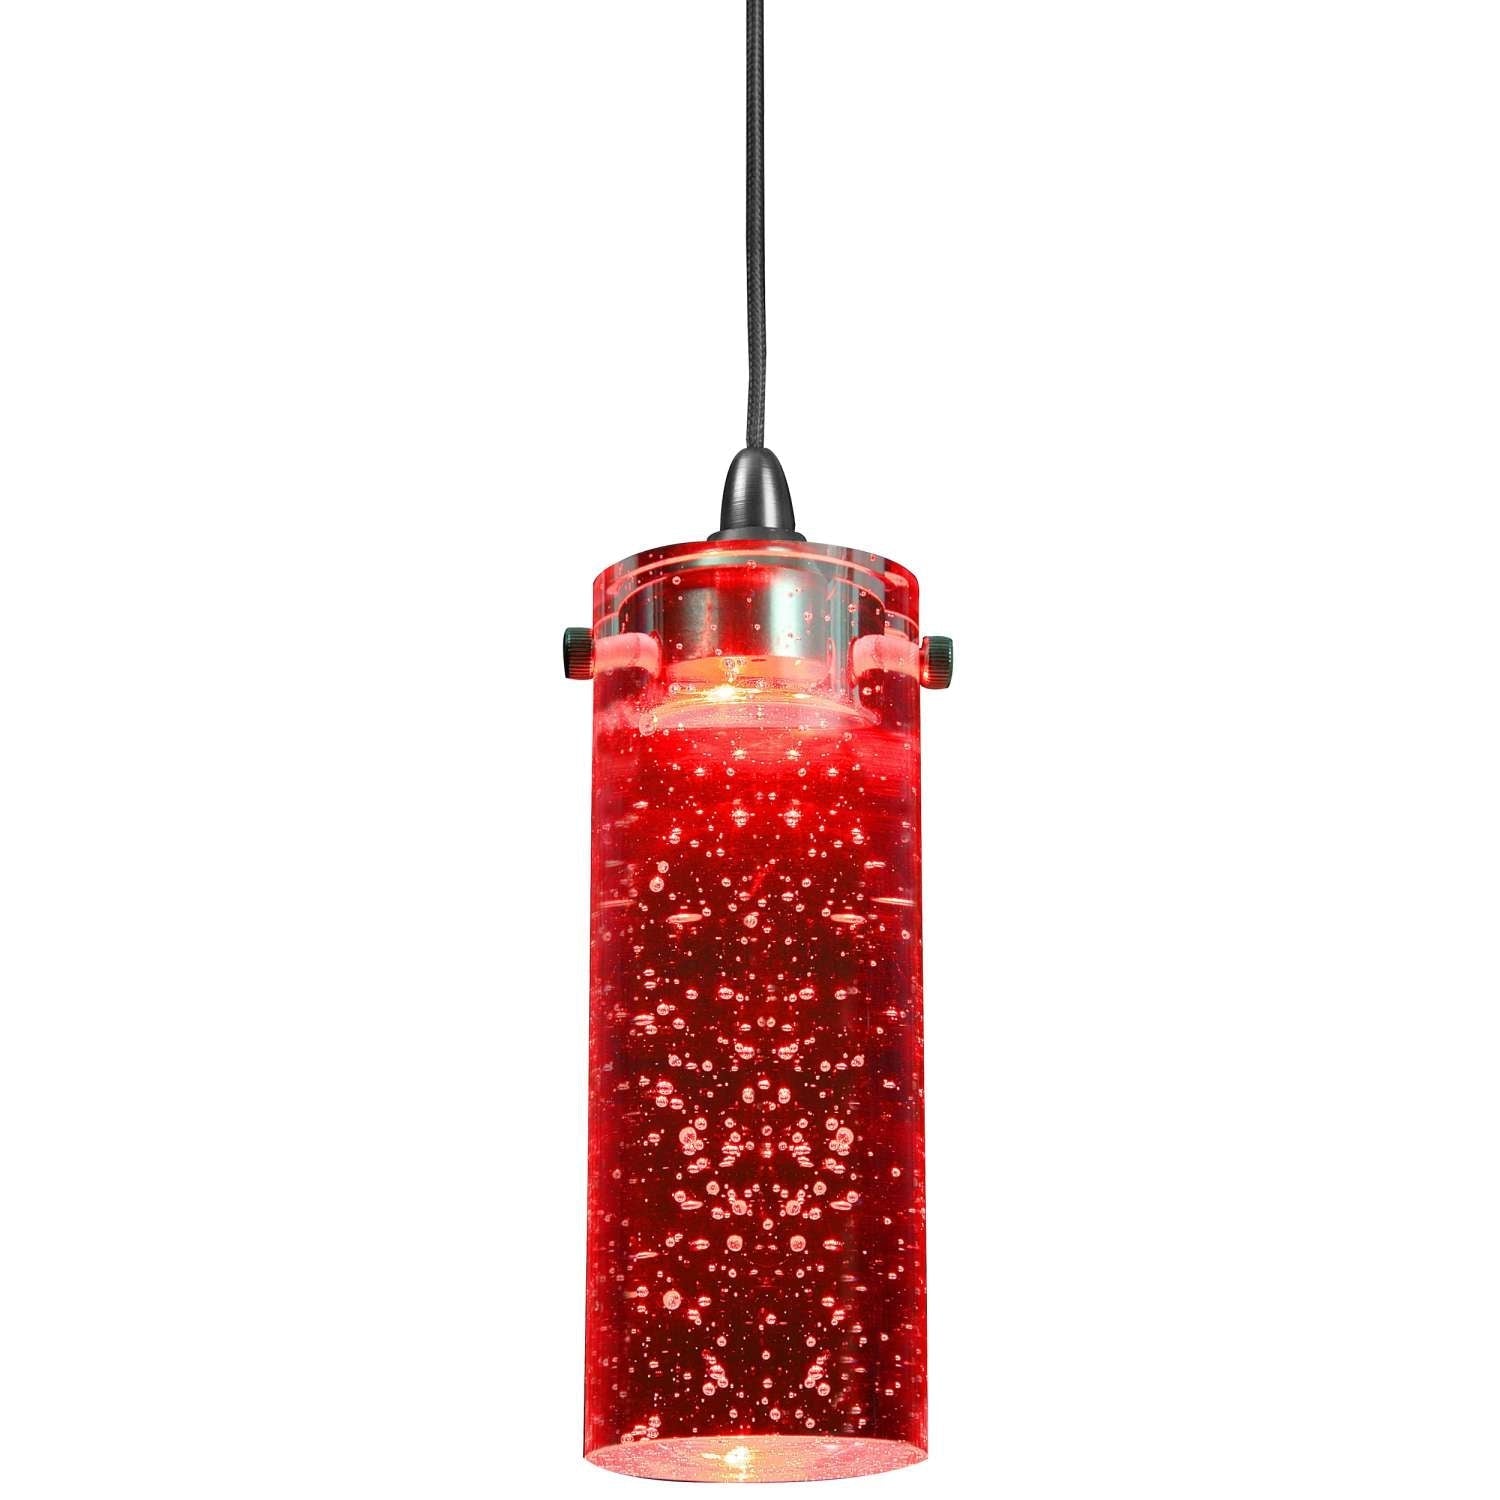 1.2 Watt Led Hanging Ceiling Lamp With Cylindrical Glass Shade, Red By Benzara